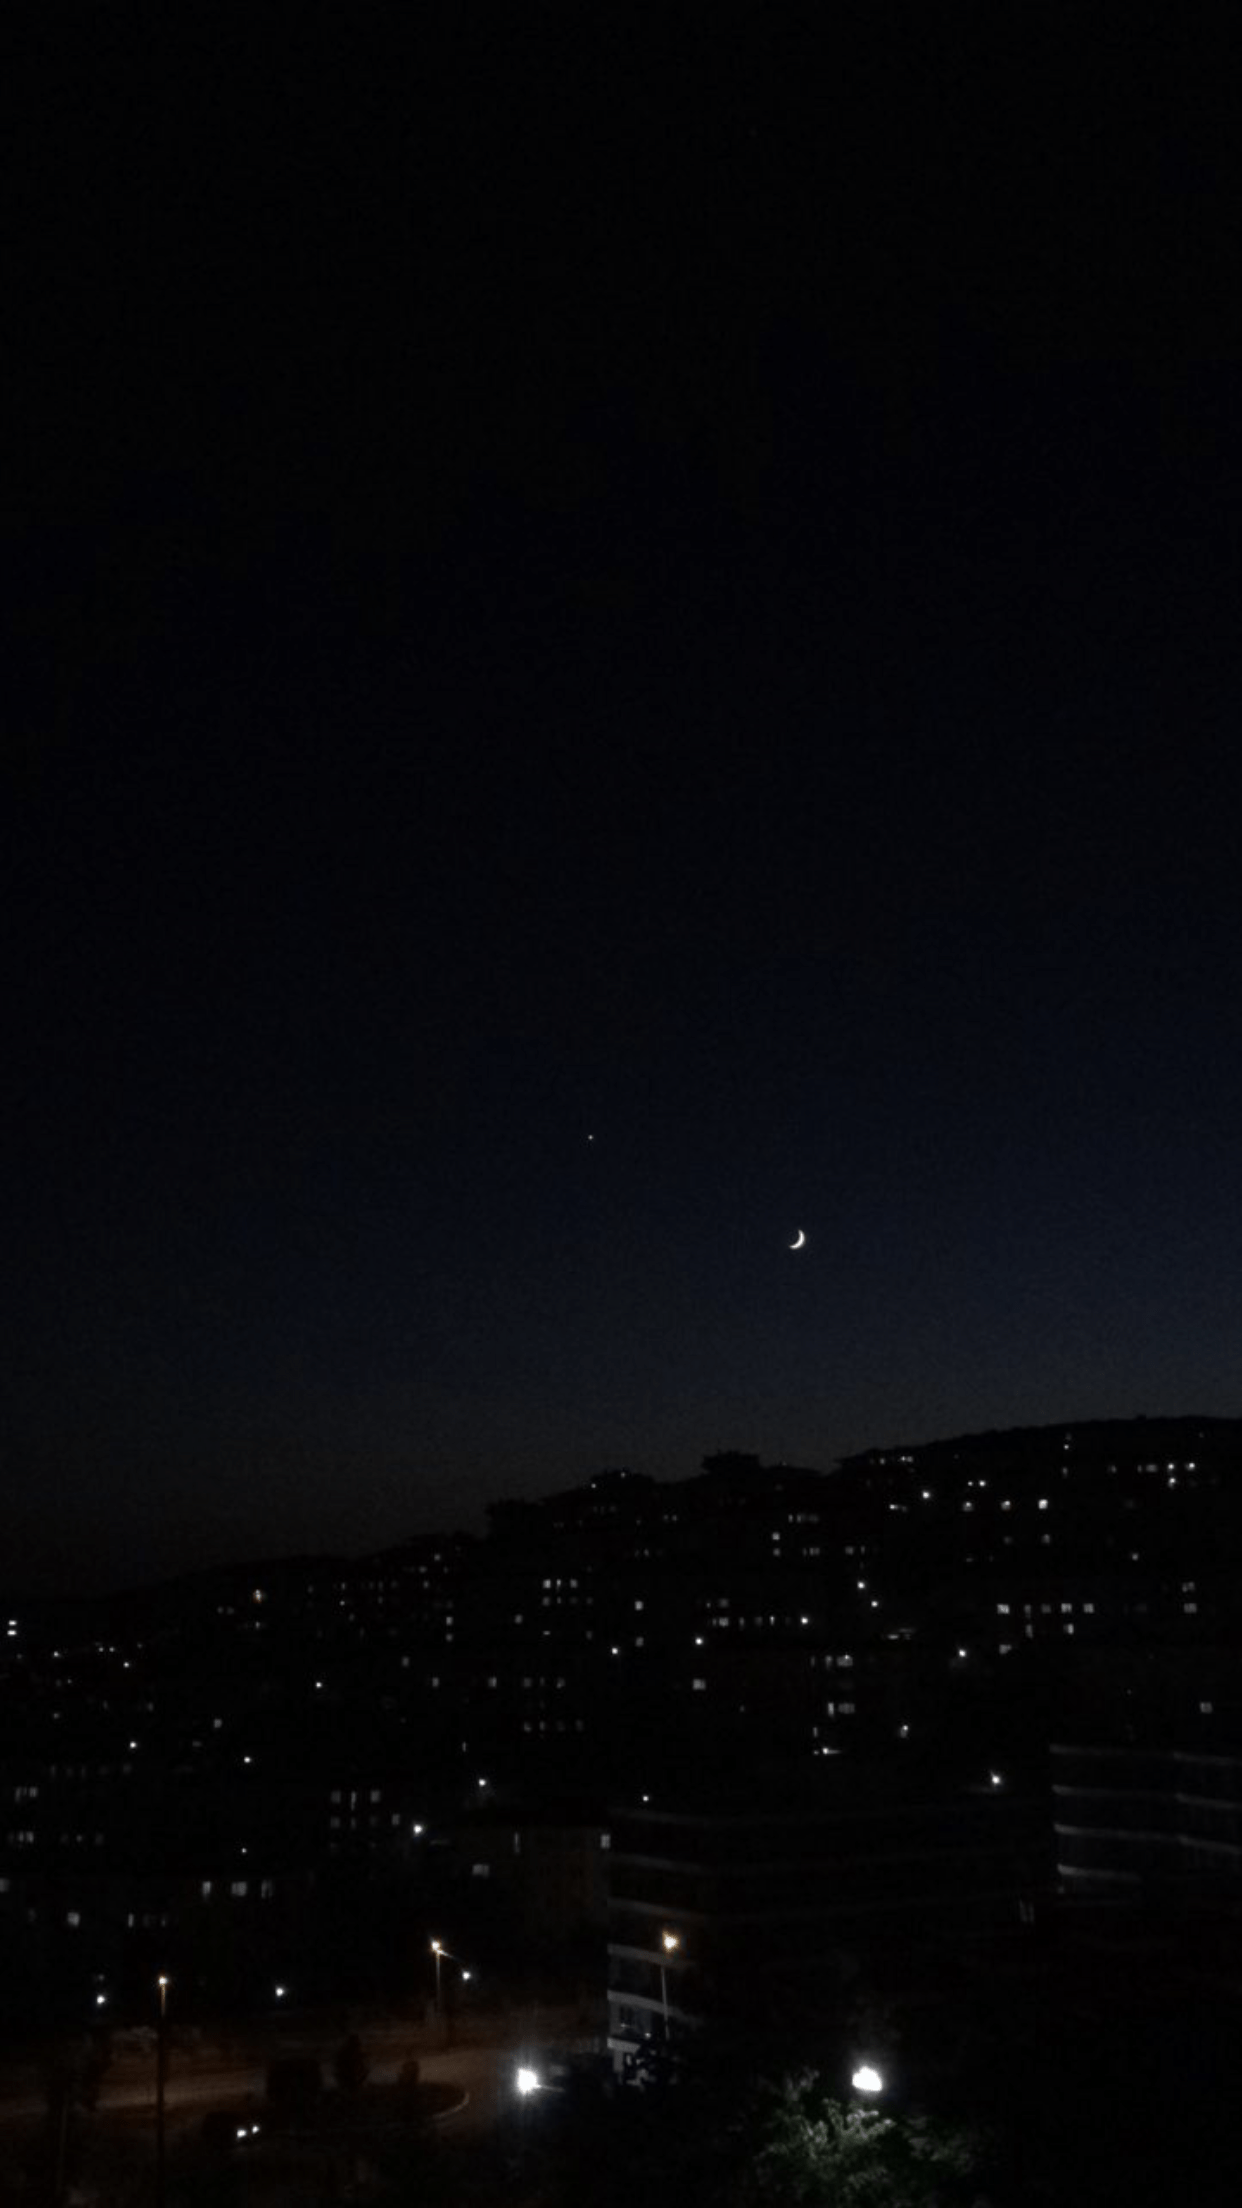 Nighttime view of the moon and venus in the sky over a city - Night